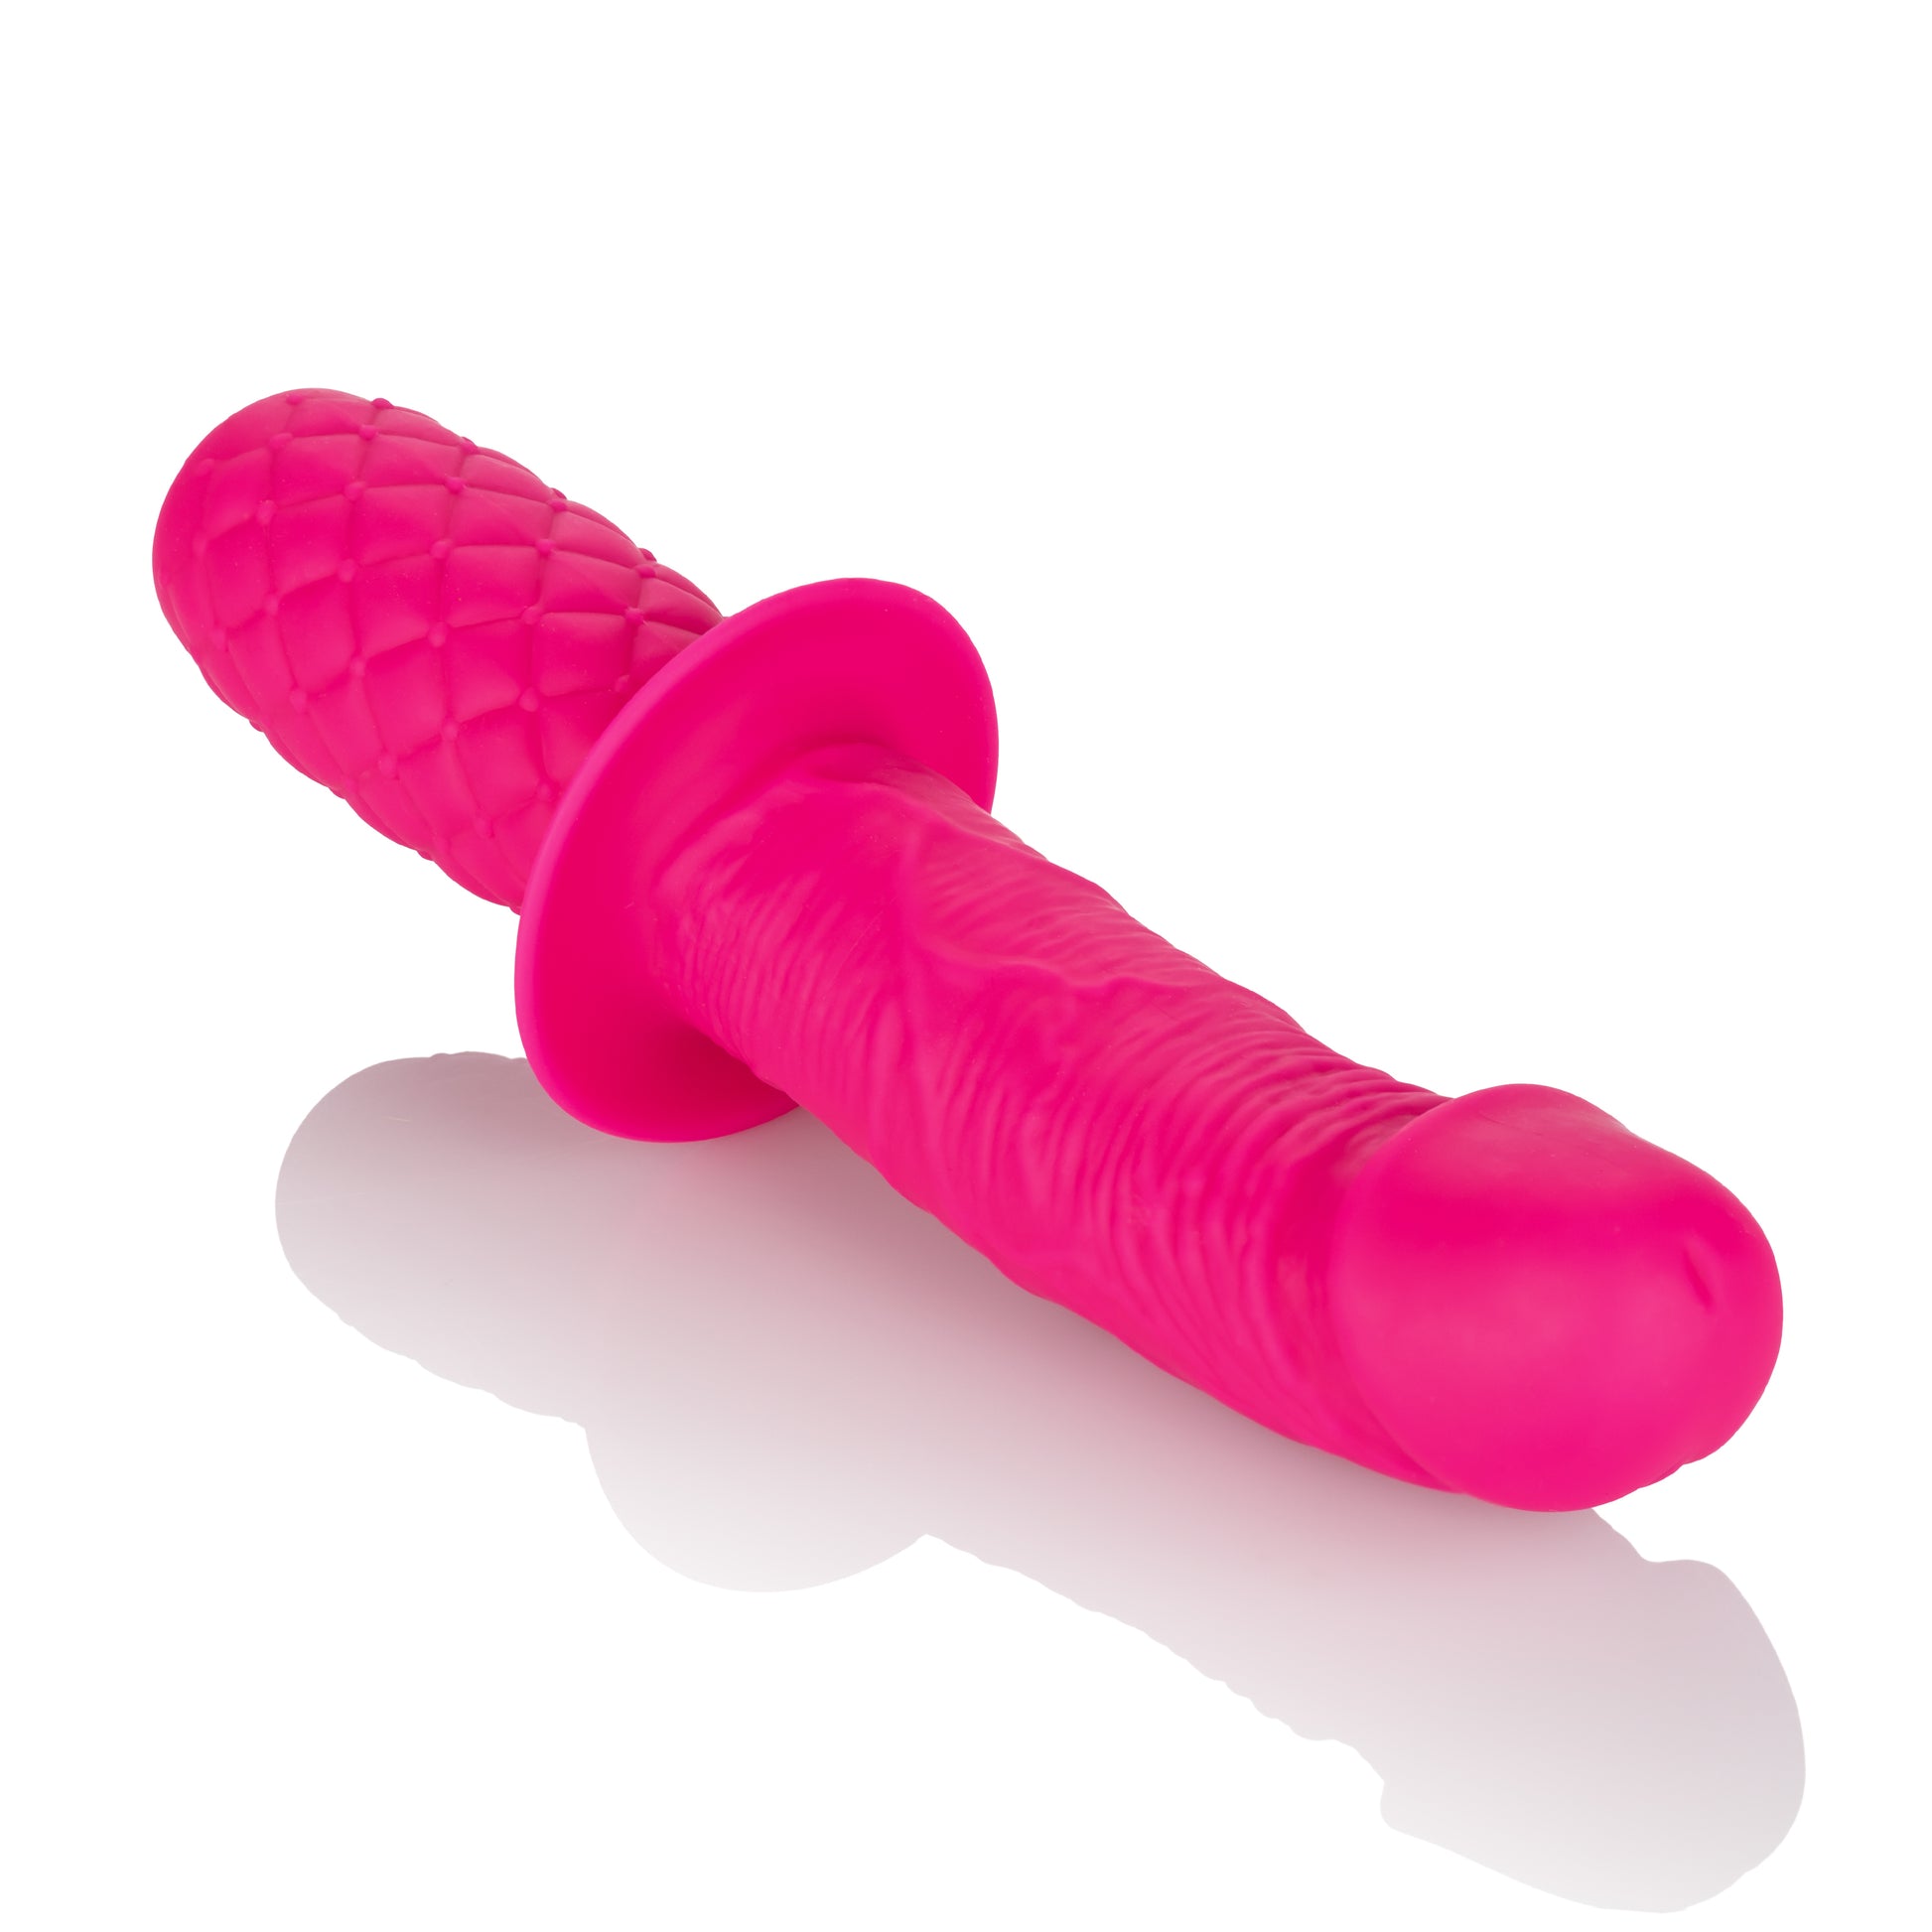 Silicone Grip Thruster - Pink